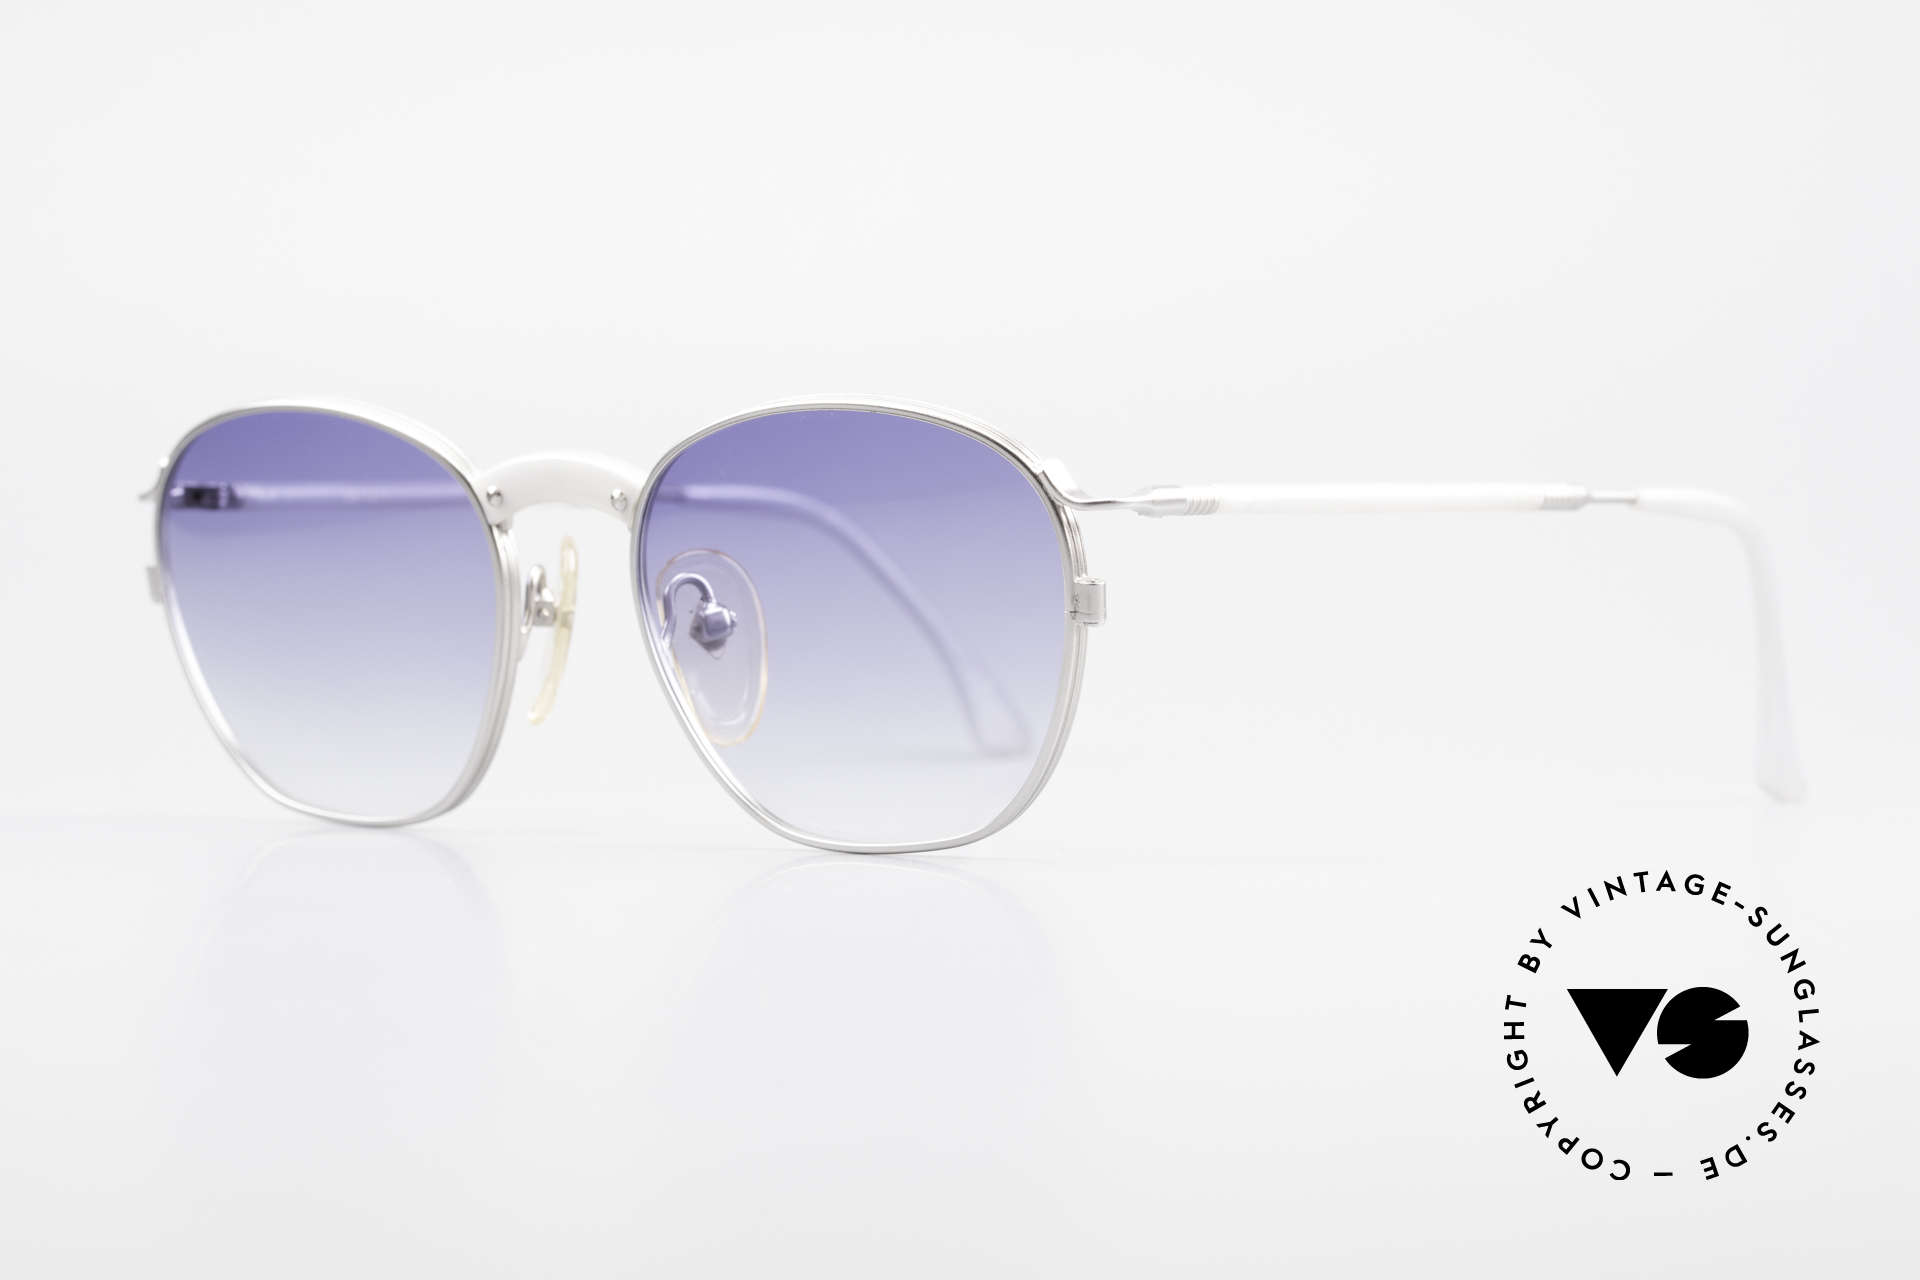 Jean Paul Gaultier 55-1271 Rare Vintage JPG Sunglasses, simply a timeless classic in top-notch craftsmanship, Made for Men and Women